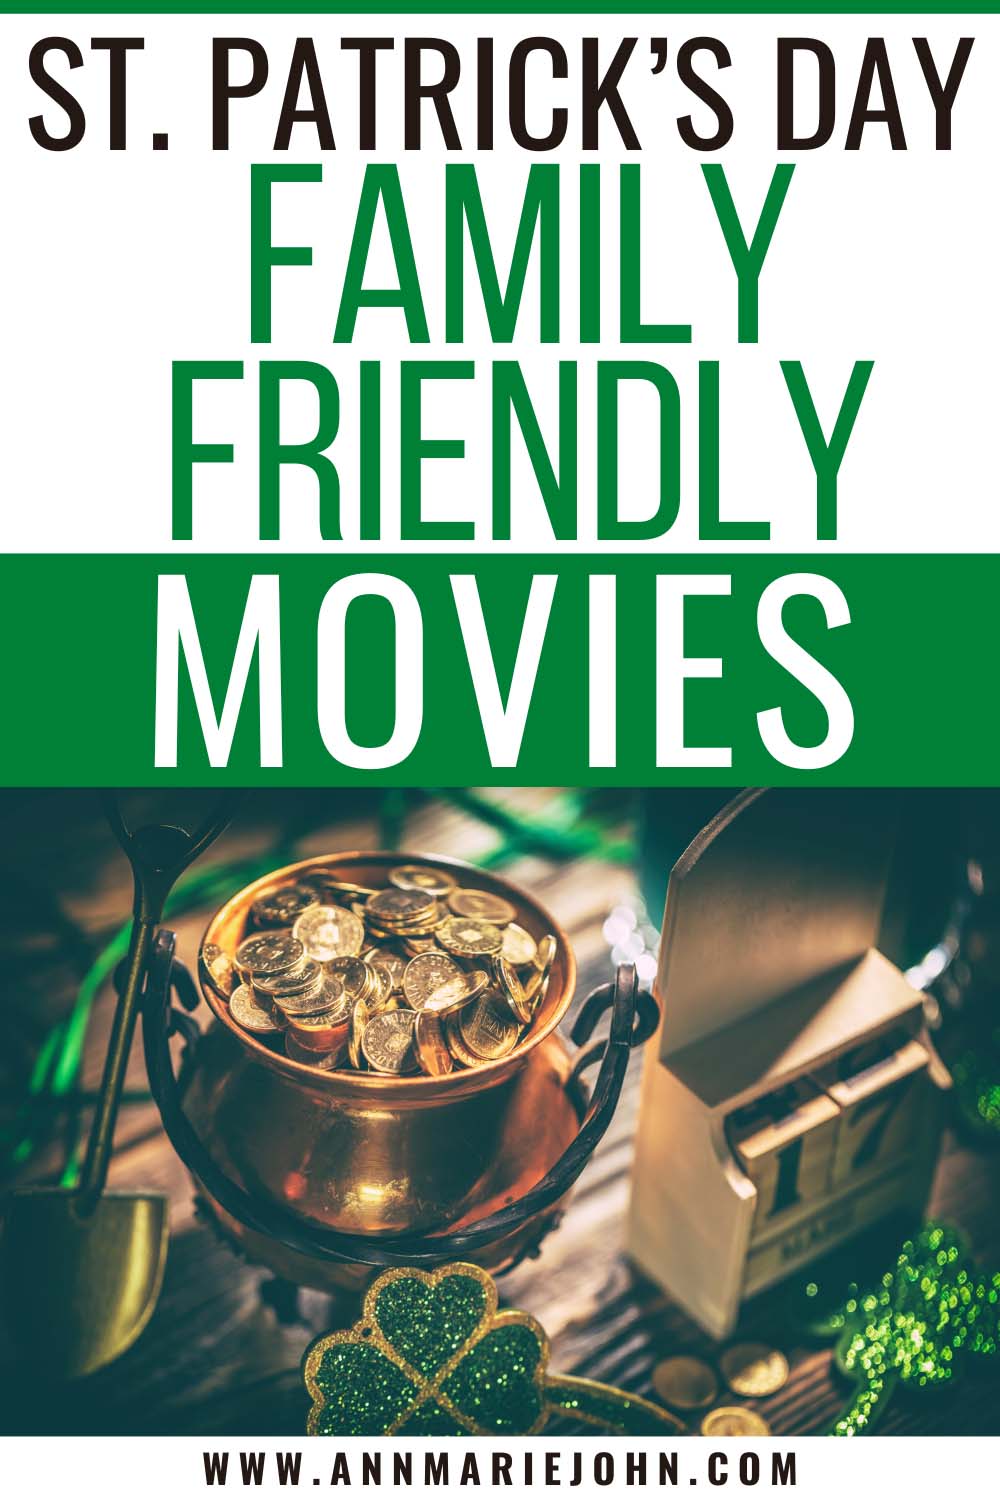 St. Patrick's Day Family Friendly Movies